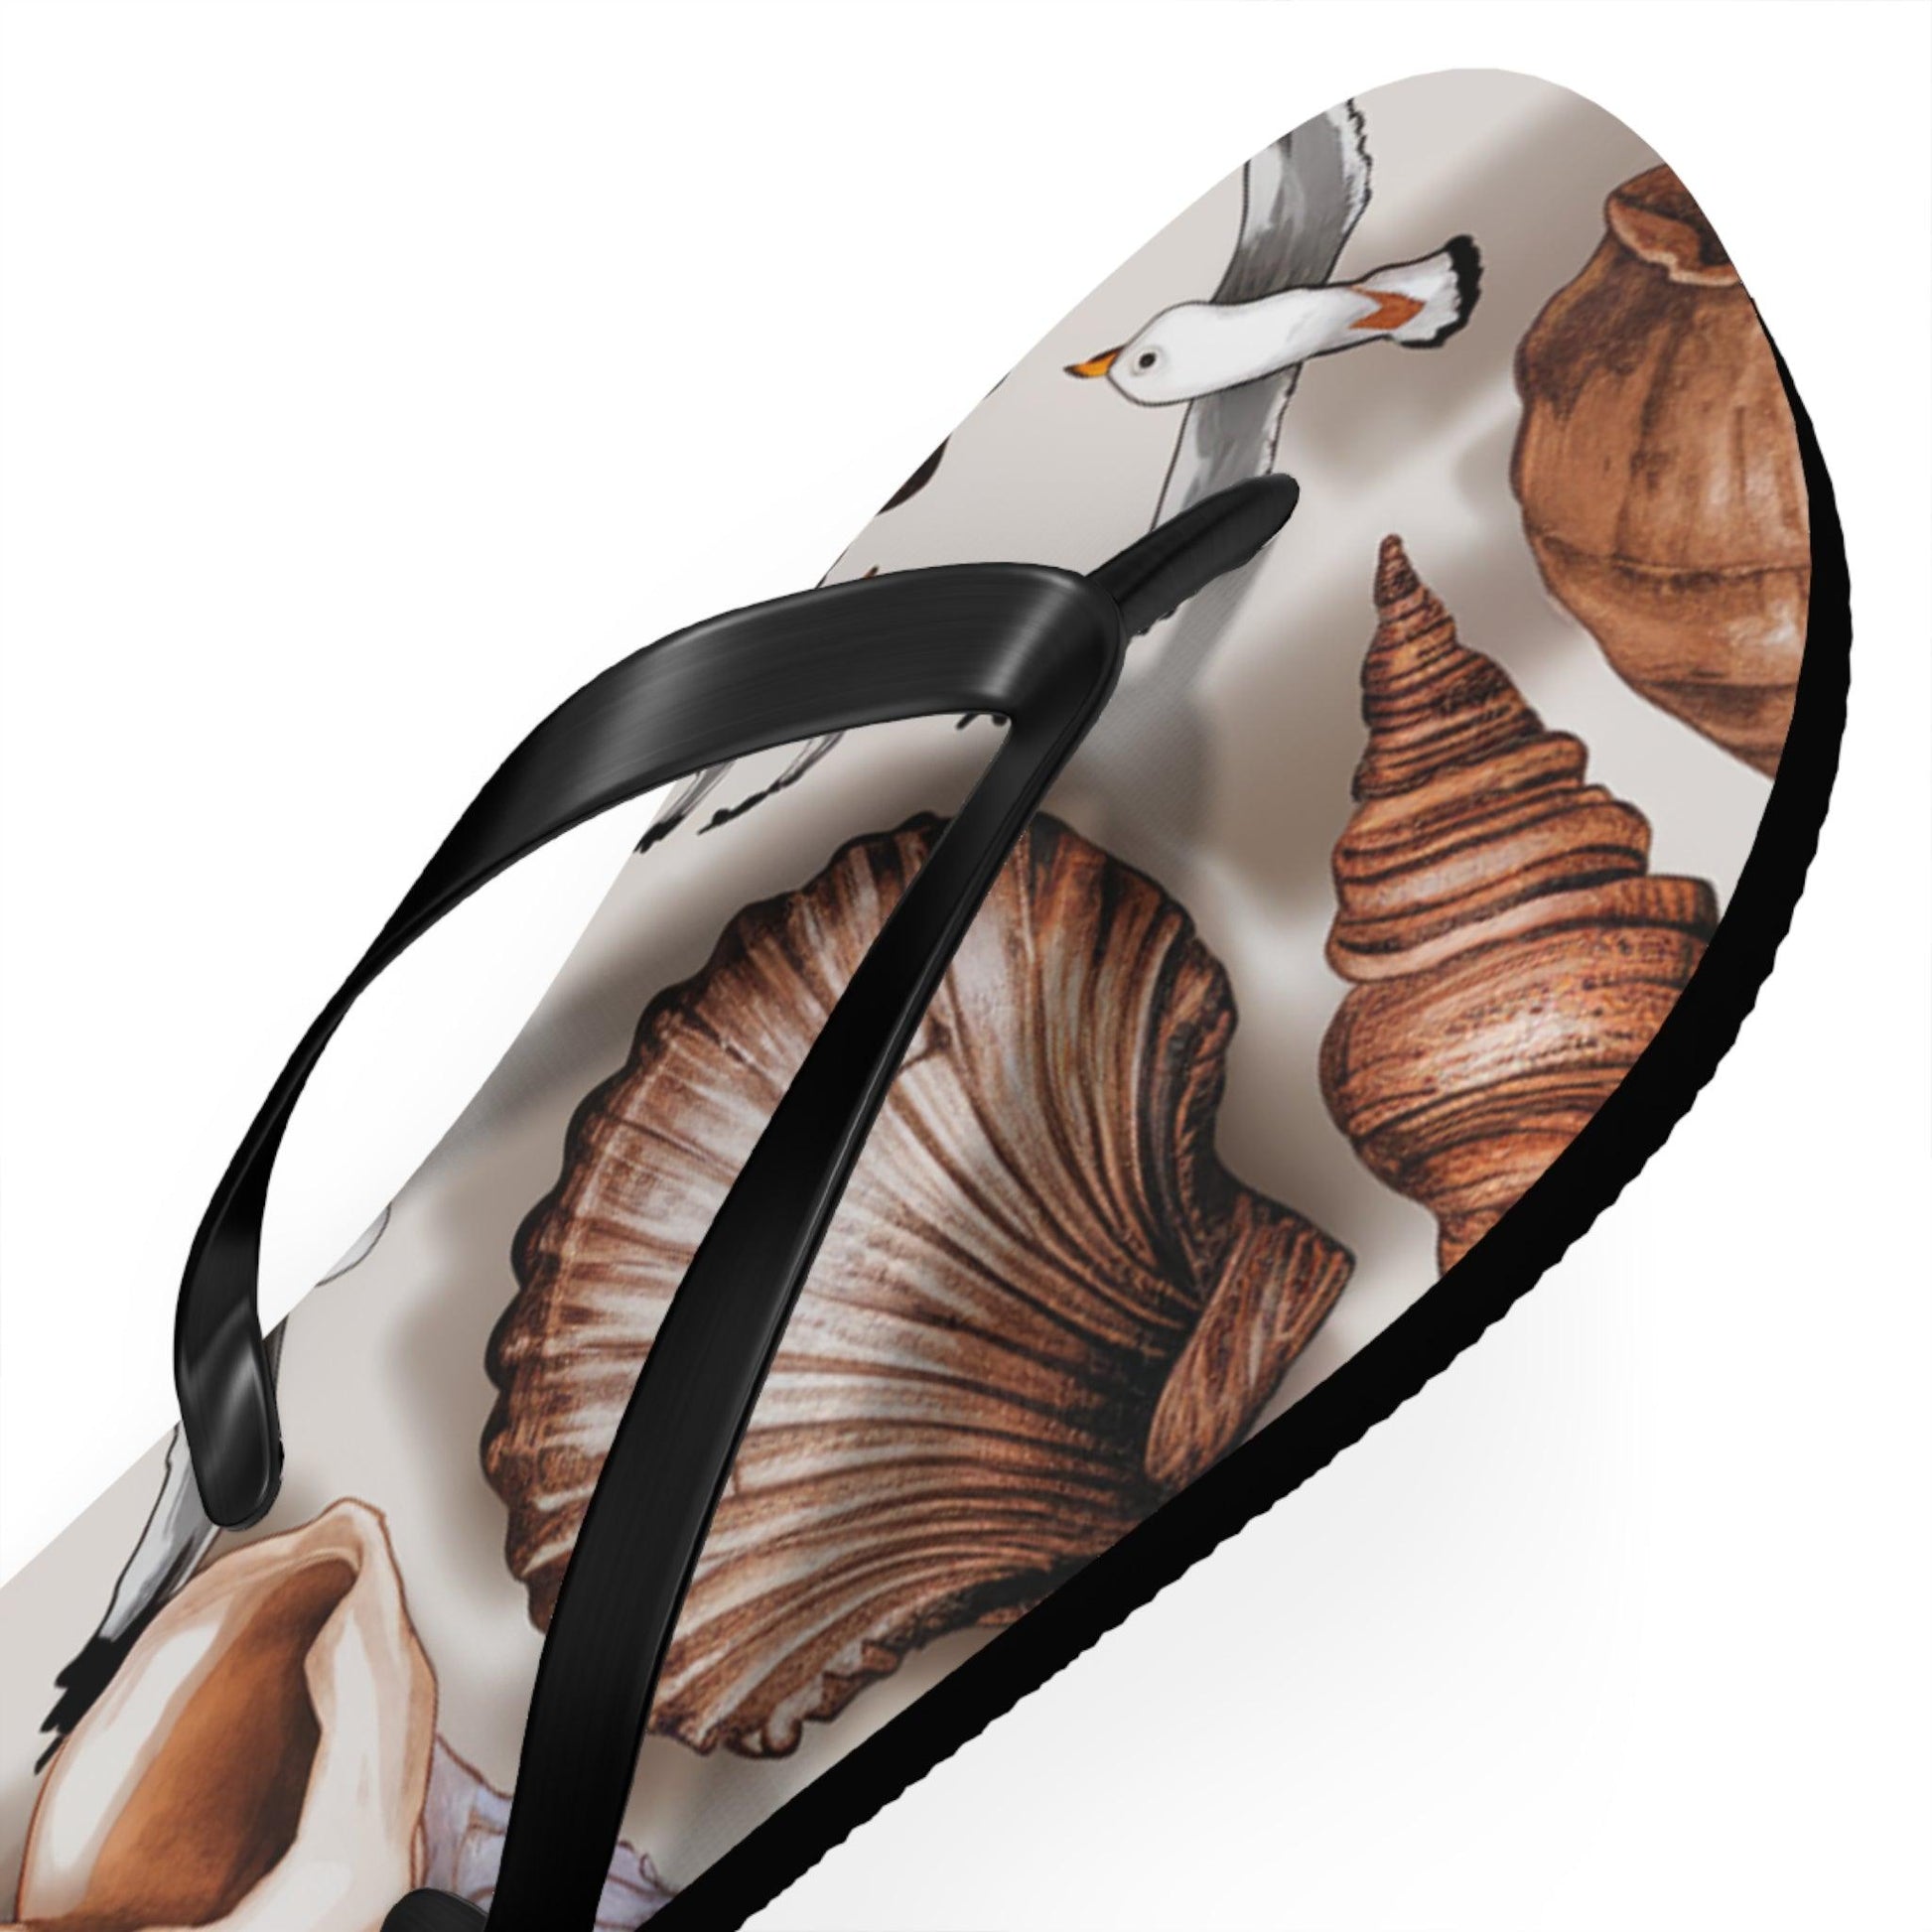 Seashell and Seagull Inspired Flip Flops v2, Express Your Beach Loving Self - Coastal Collections